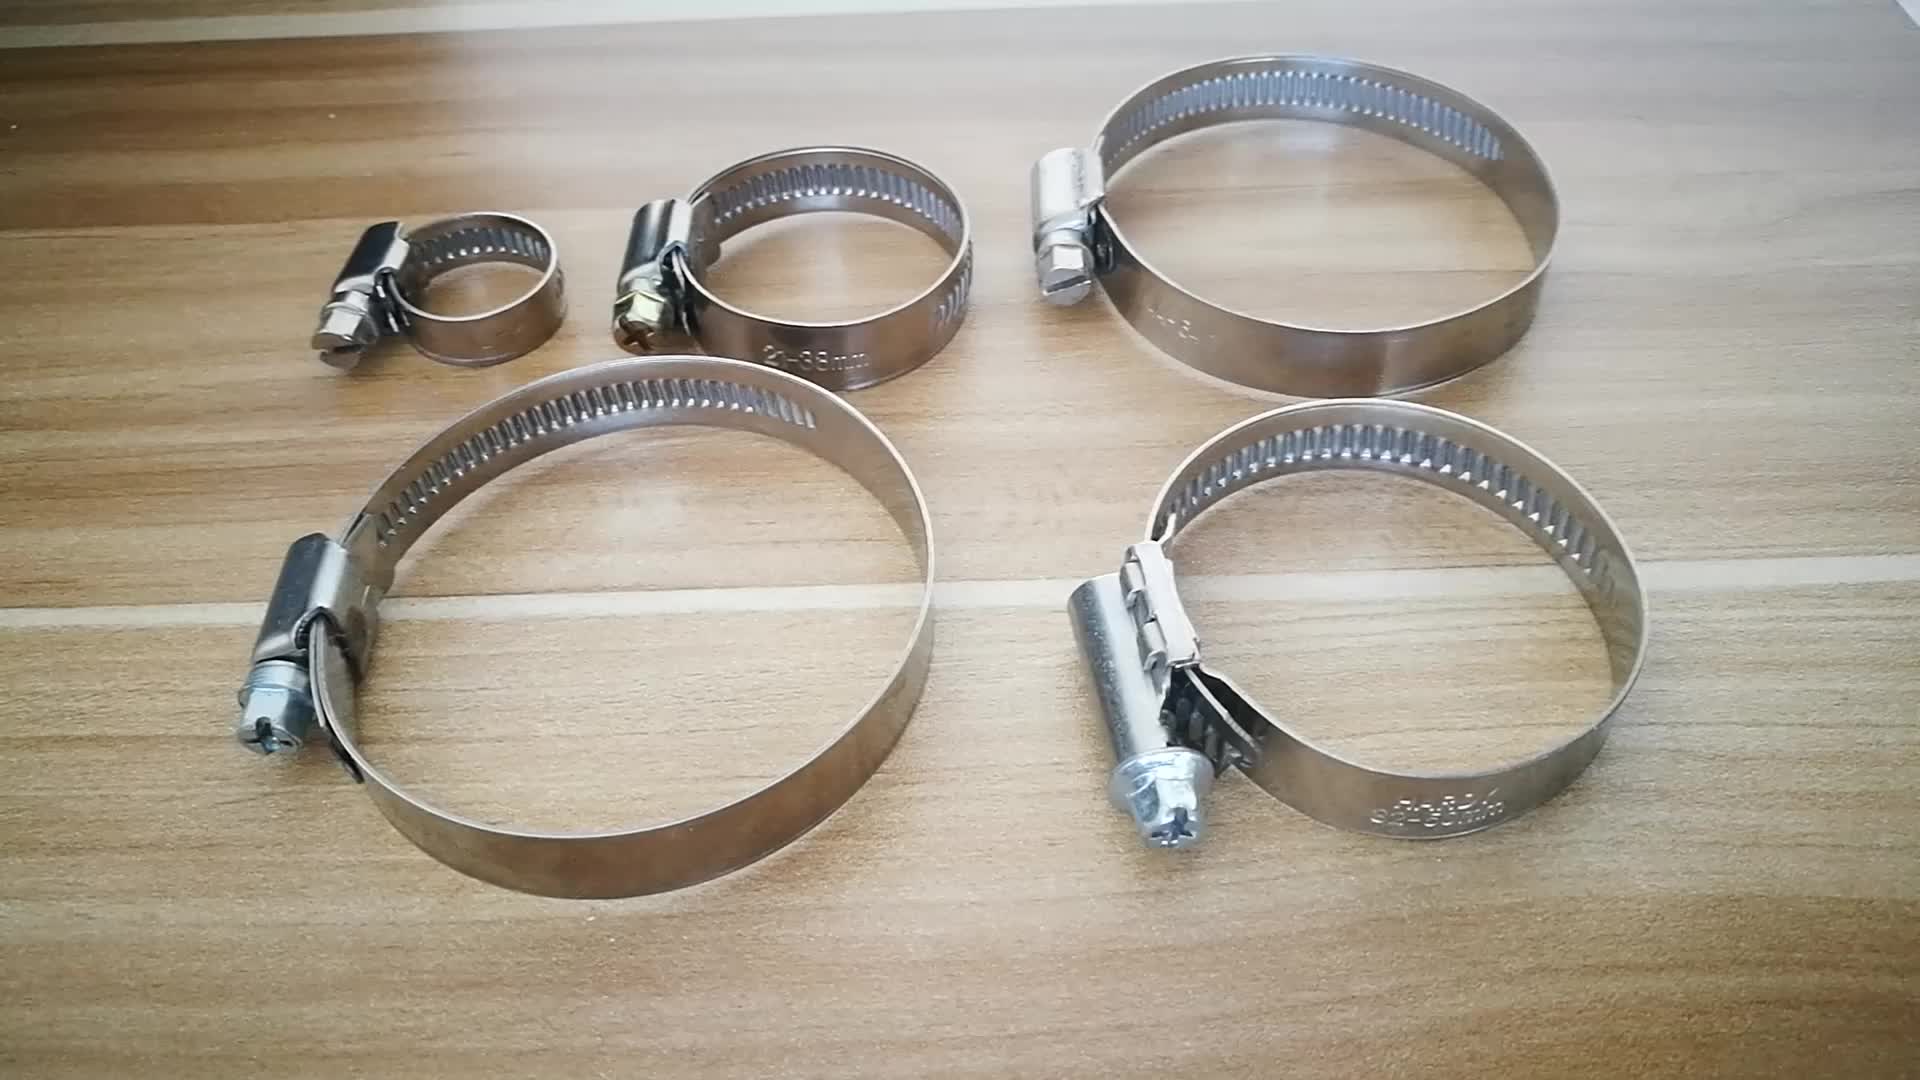 Correct use and advantages of stainless steel hose clamps